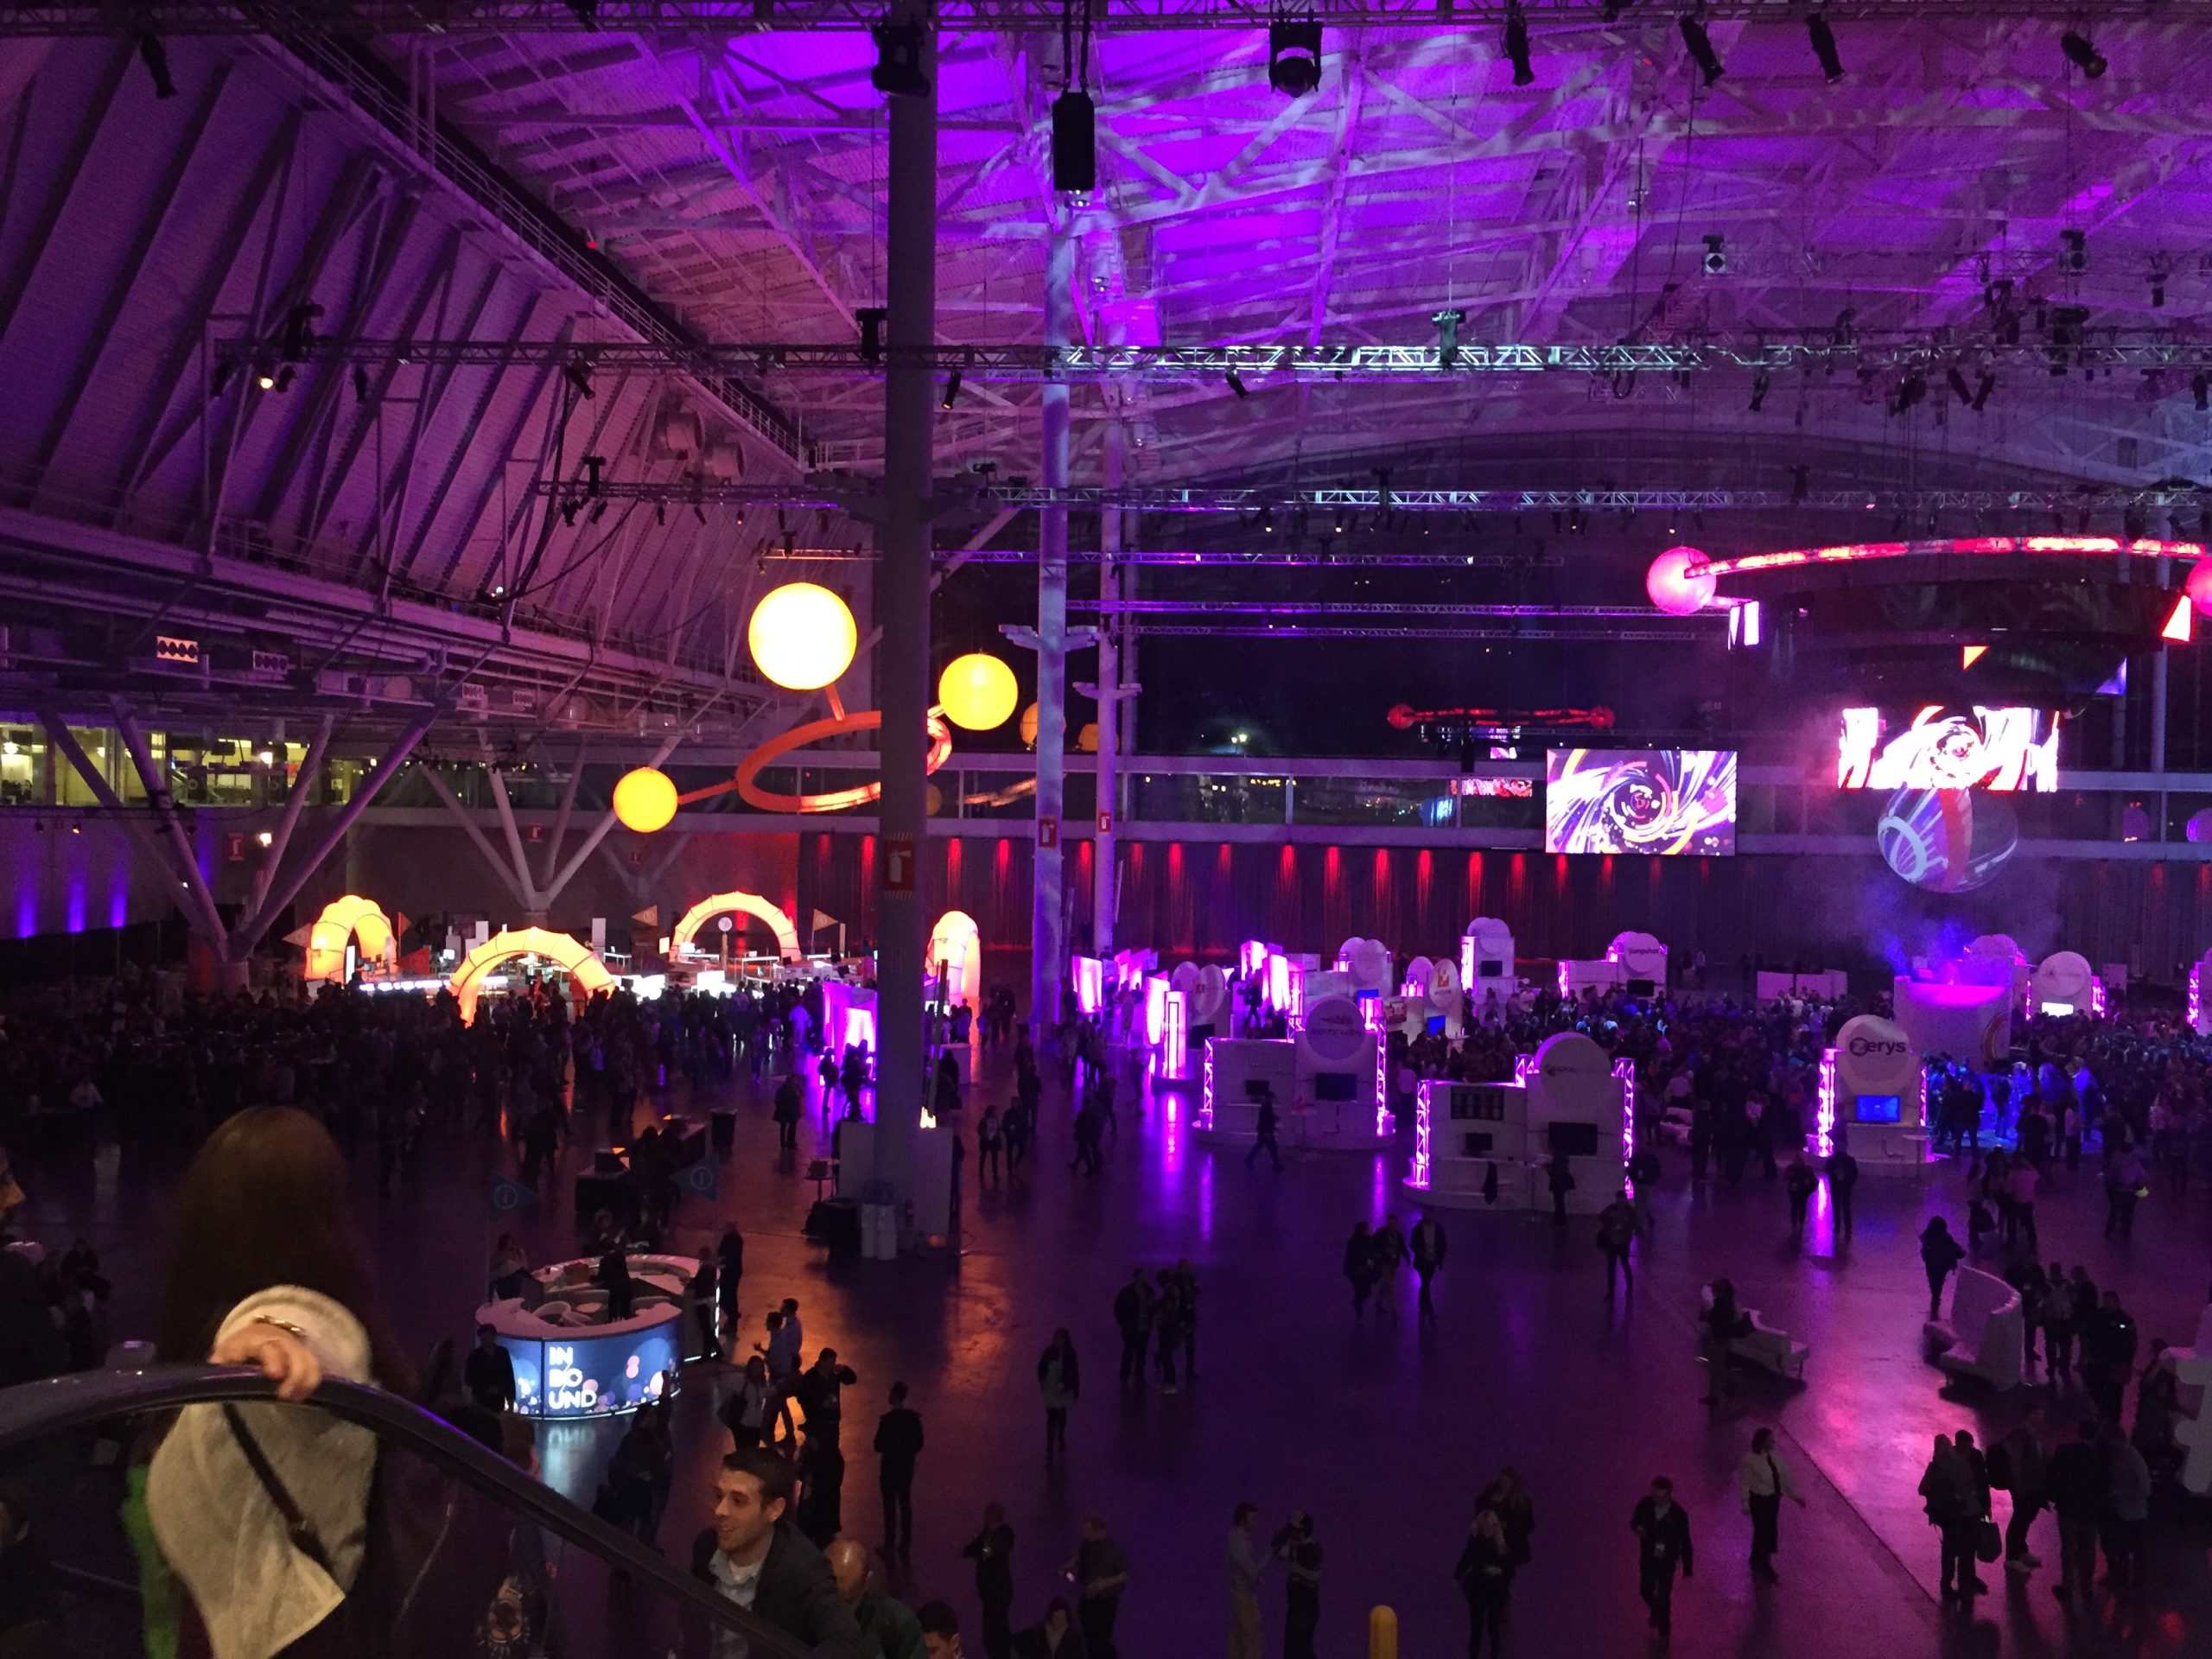 HubSpot's INBOUND marketing conference included a sleek tradeshow floor that definitely set itself apart from standard expos.